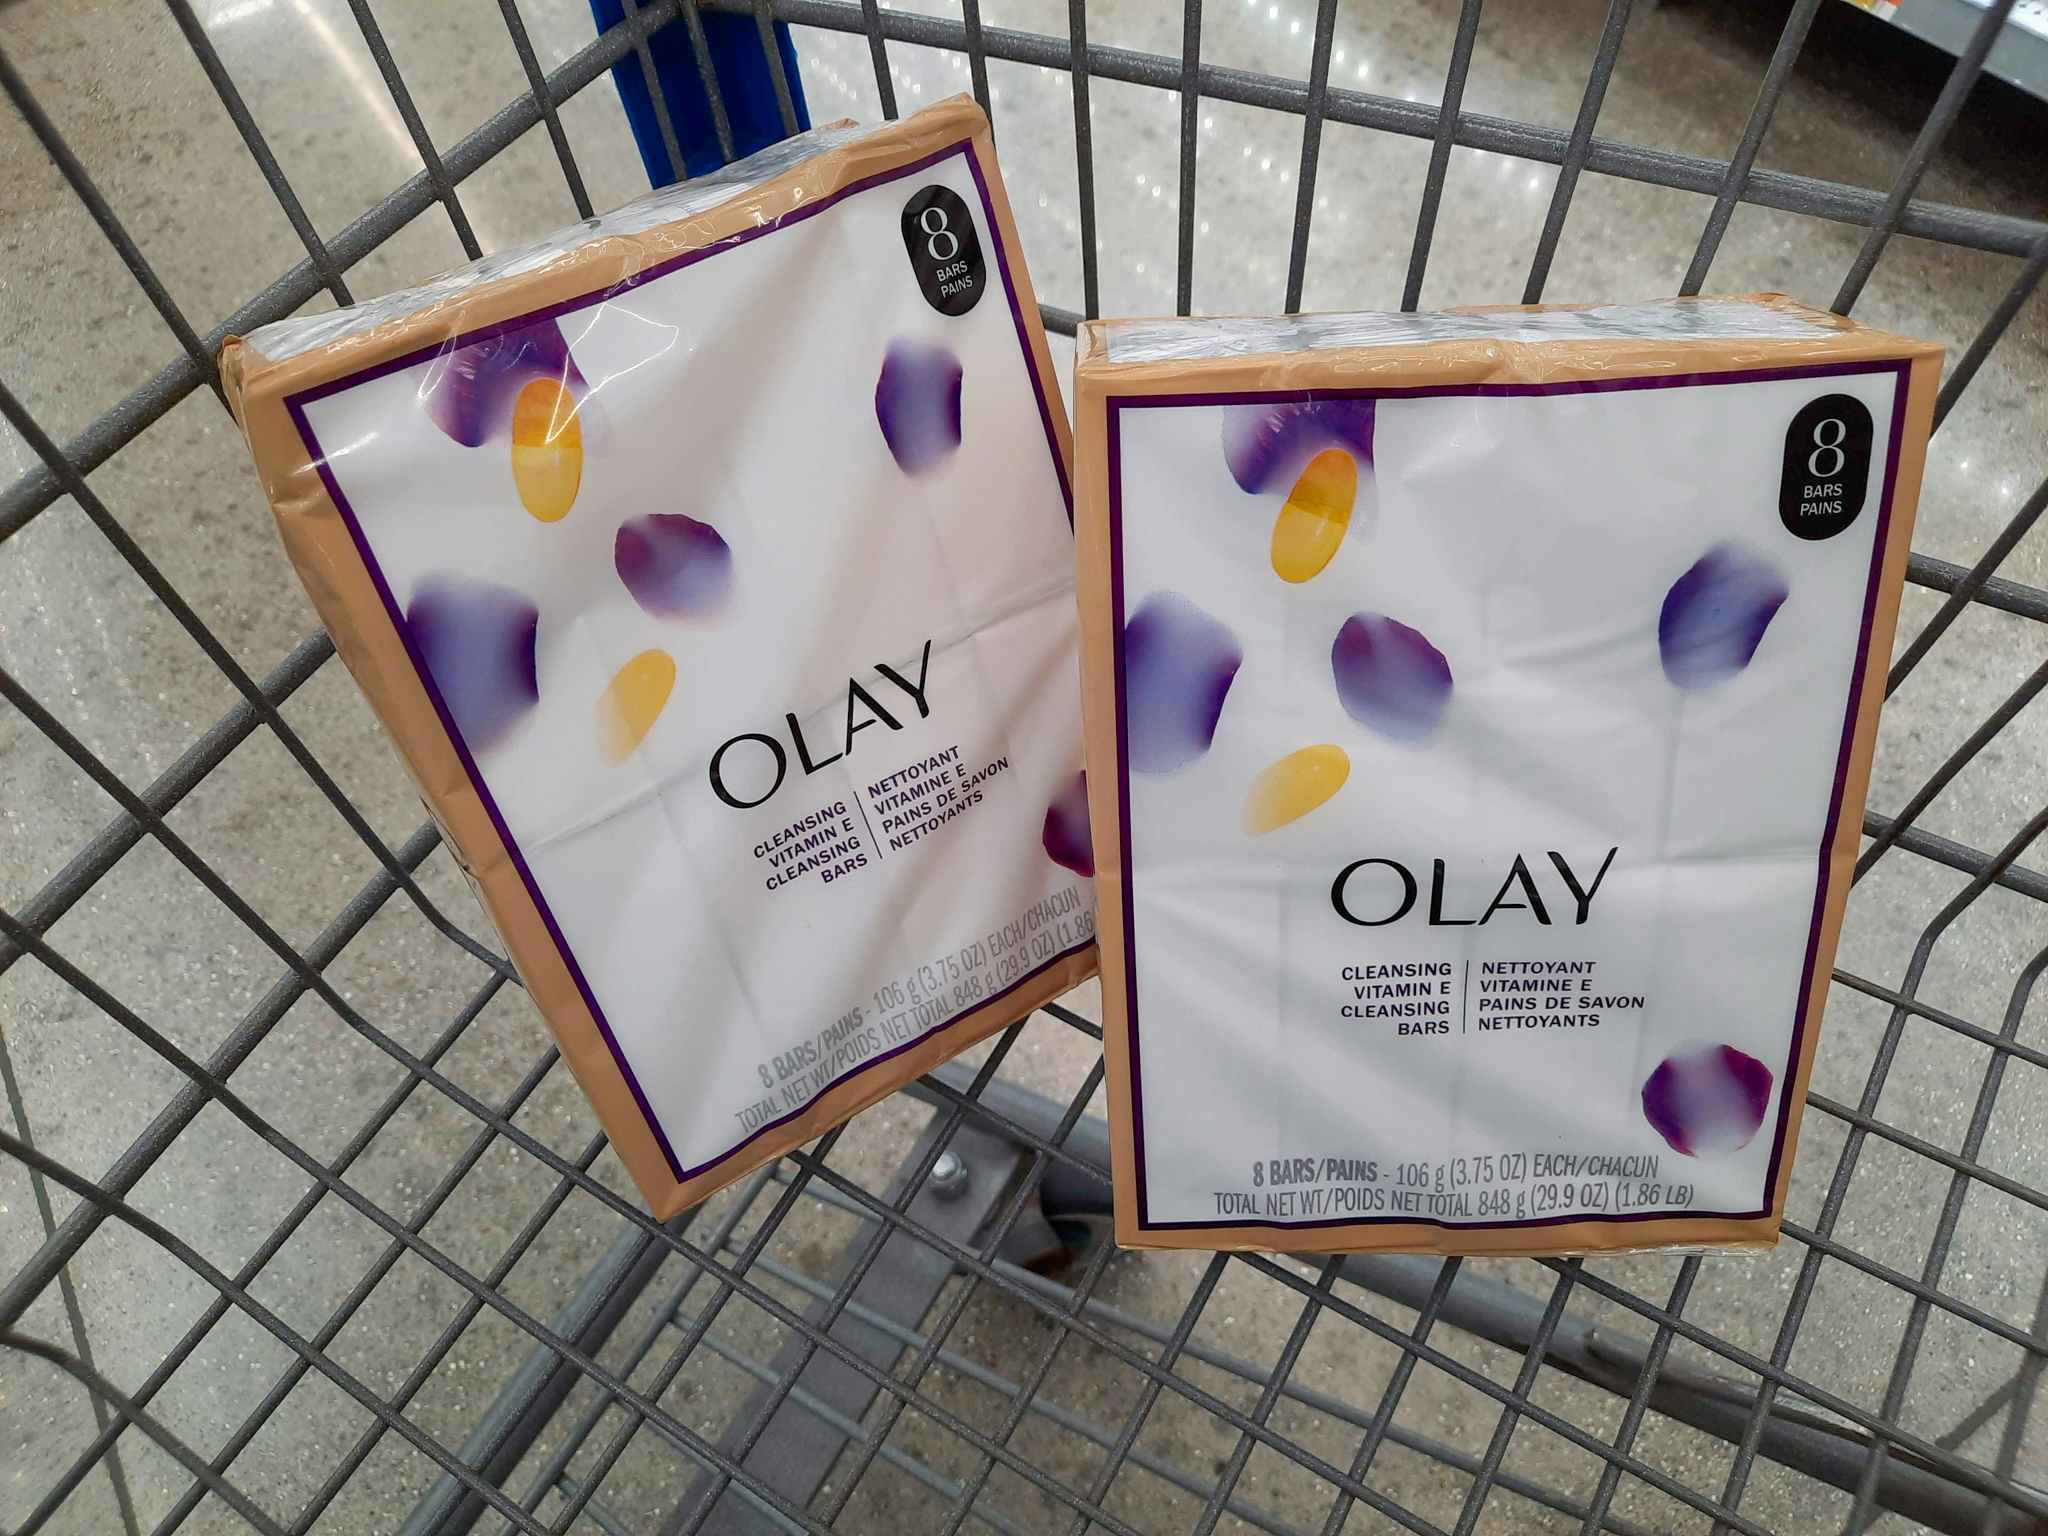 Two Olay Cleaning Bar products in Walmart shopping cart